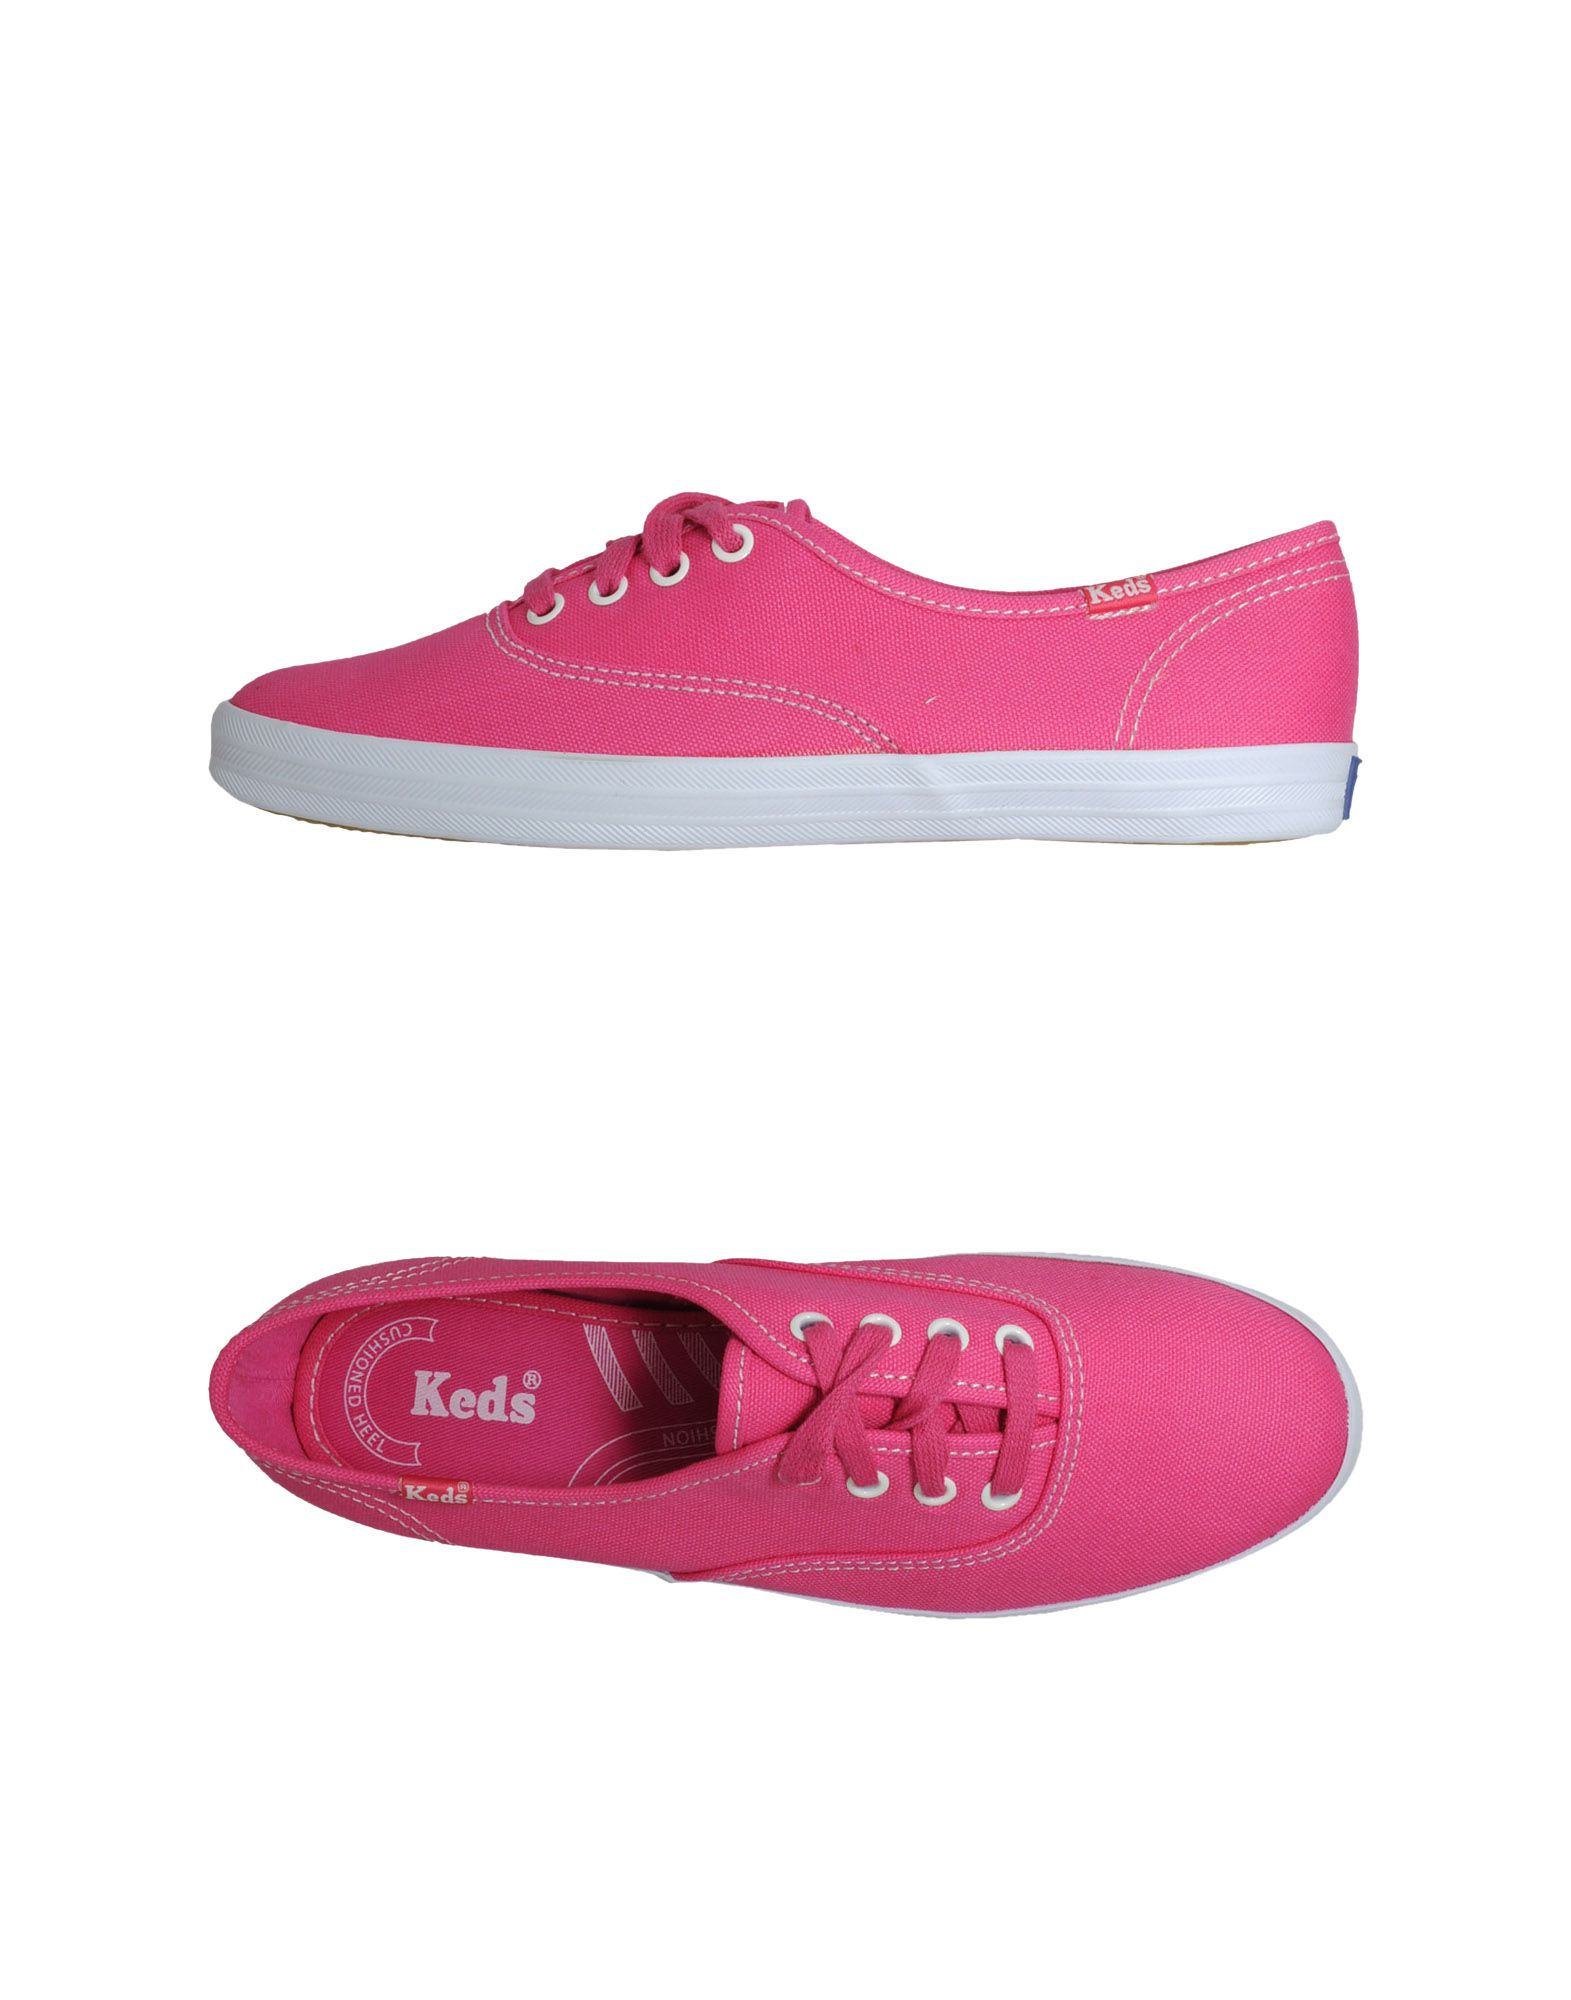 Foto Keds Sneakers Mujer Fucsia